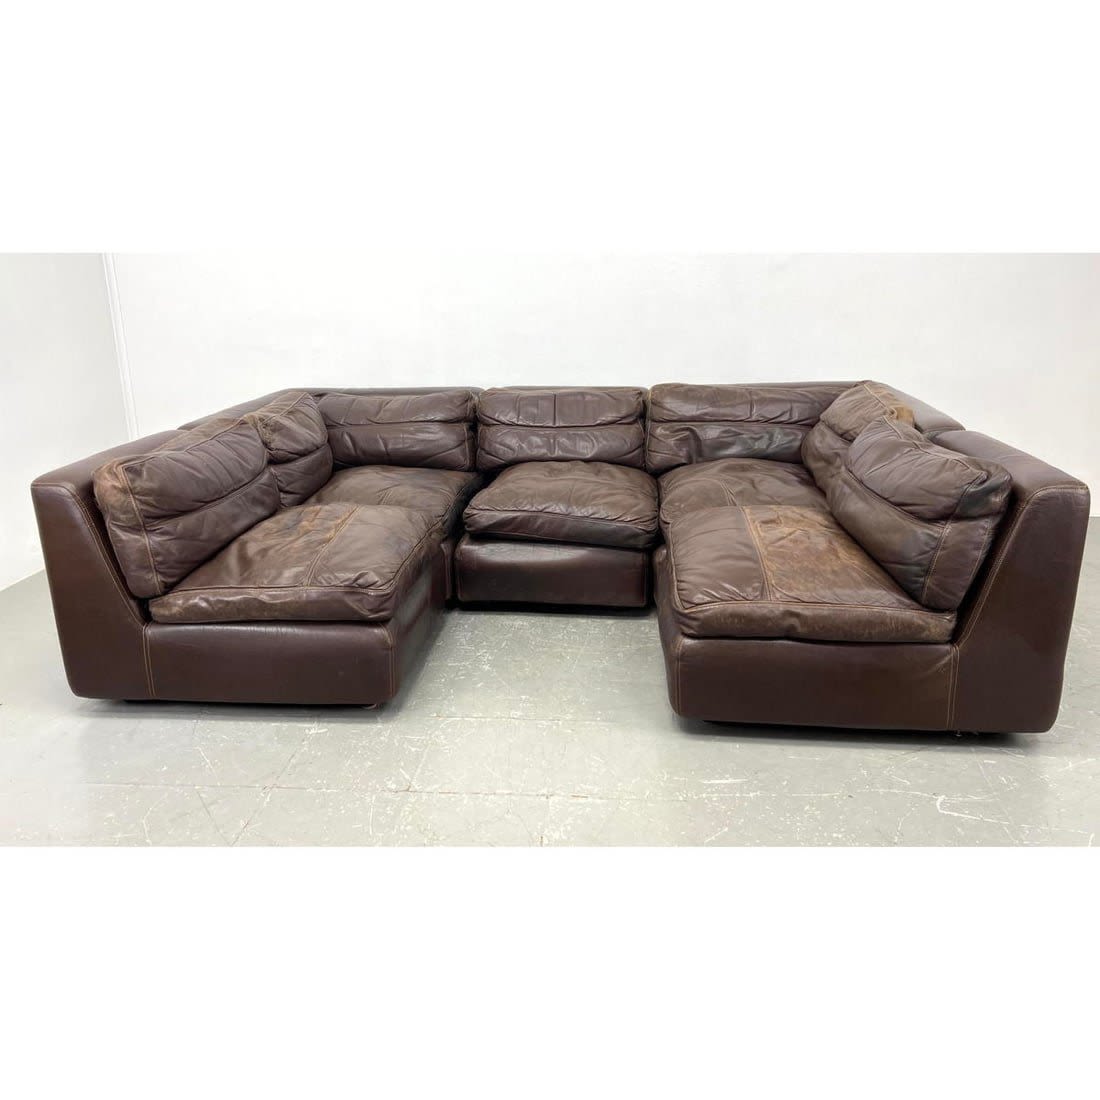 5pc Brown Leather Sectional Seating 3cf4d0